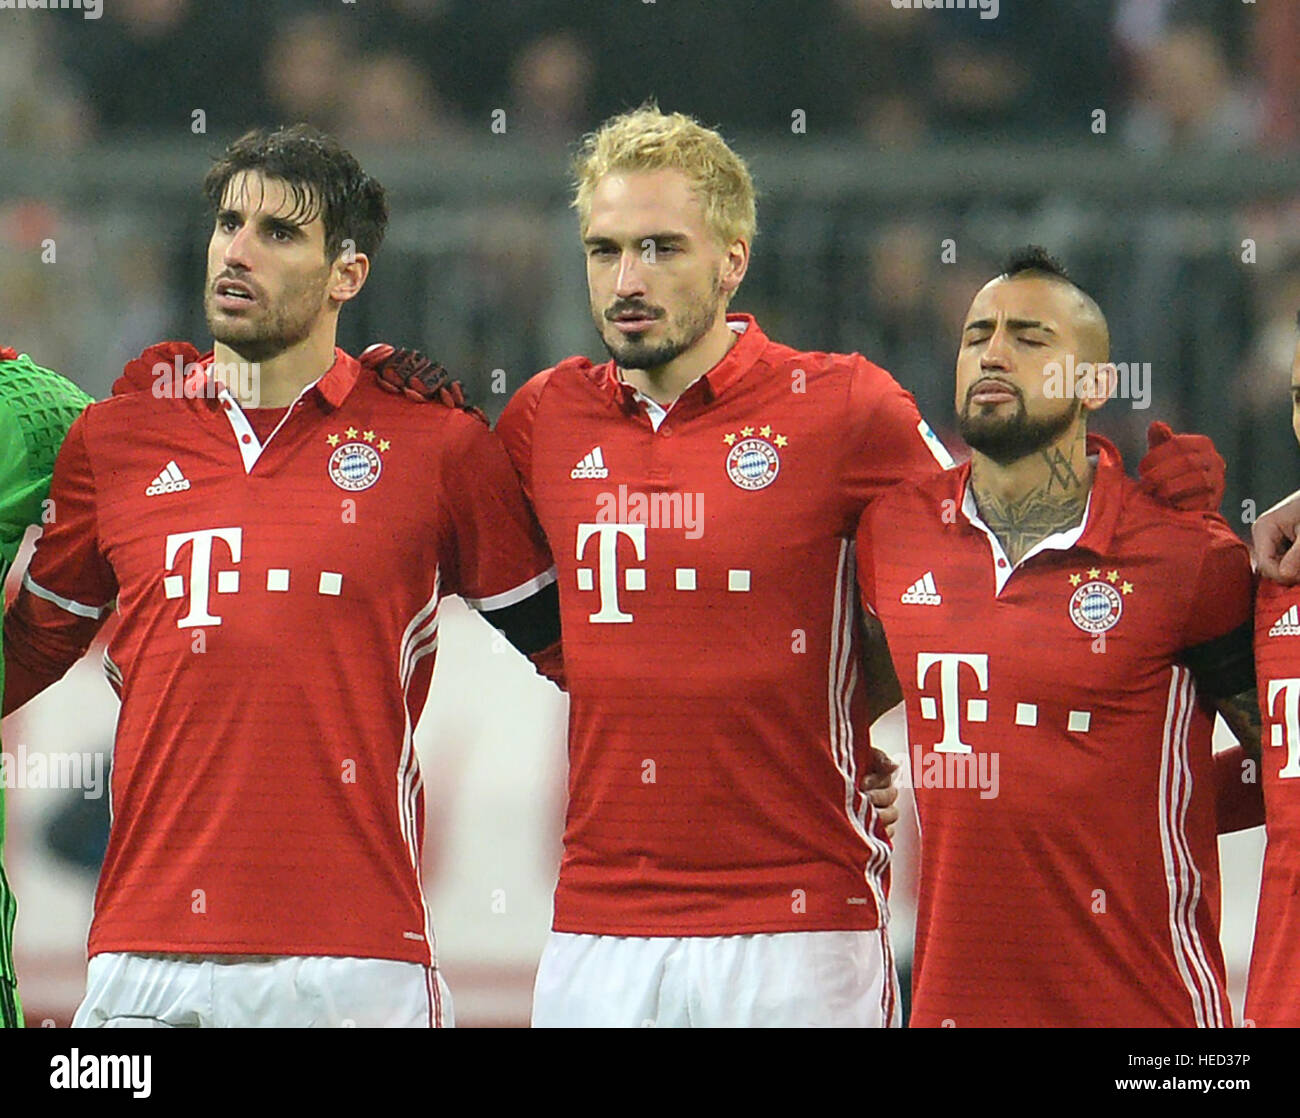 Munich, Germany. 21st Dec, 2016. Players from Munich (L-R) Javi Martinez, Mats Hummels, Arturo Vidal during a moment's silence for the victims of the Berlin terror attack at the German Bundesliga soccer match between Bayern Munich vs. RB Leipzig in the Allianz Arena in Munich, Germany, 21 December 2016. At least 12 people were killed and around 50 injured in the evening of 19 December 2016, when a truck was driven into a Christmas market. Credit: dpa picture alliance/Alamy Live News Stock Photo